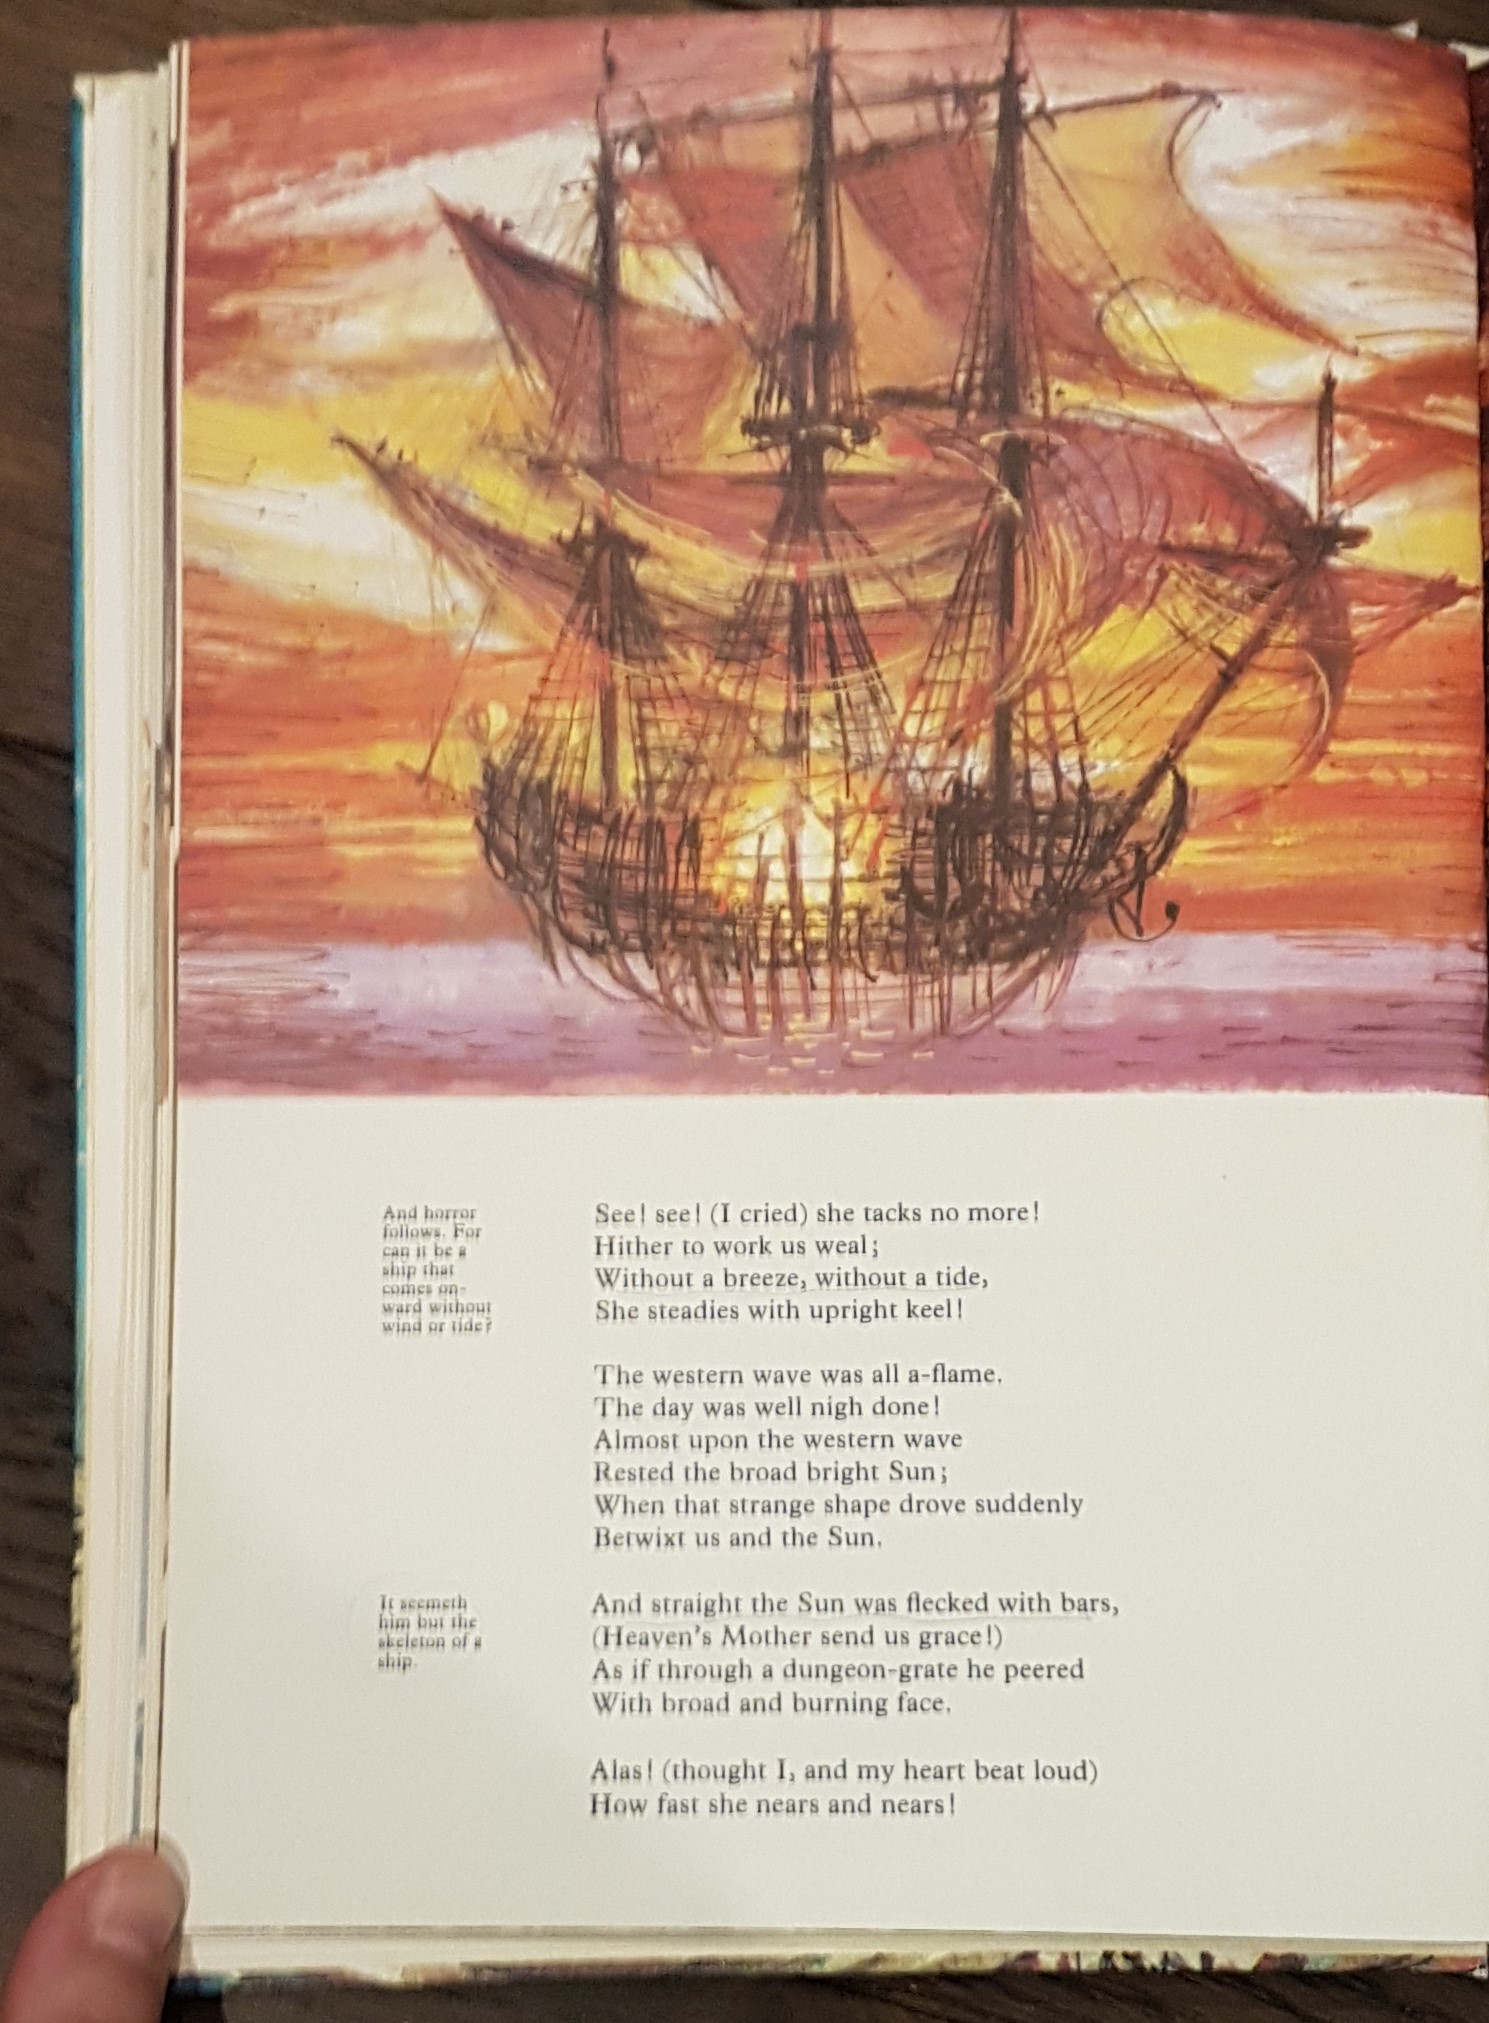 Comparing Illustrated Versions of Ancient Mariner